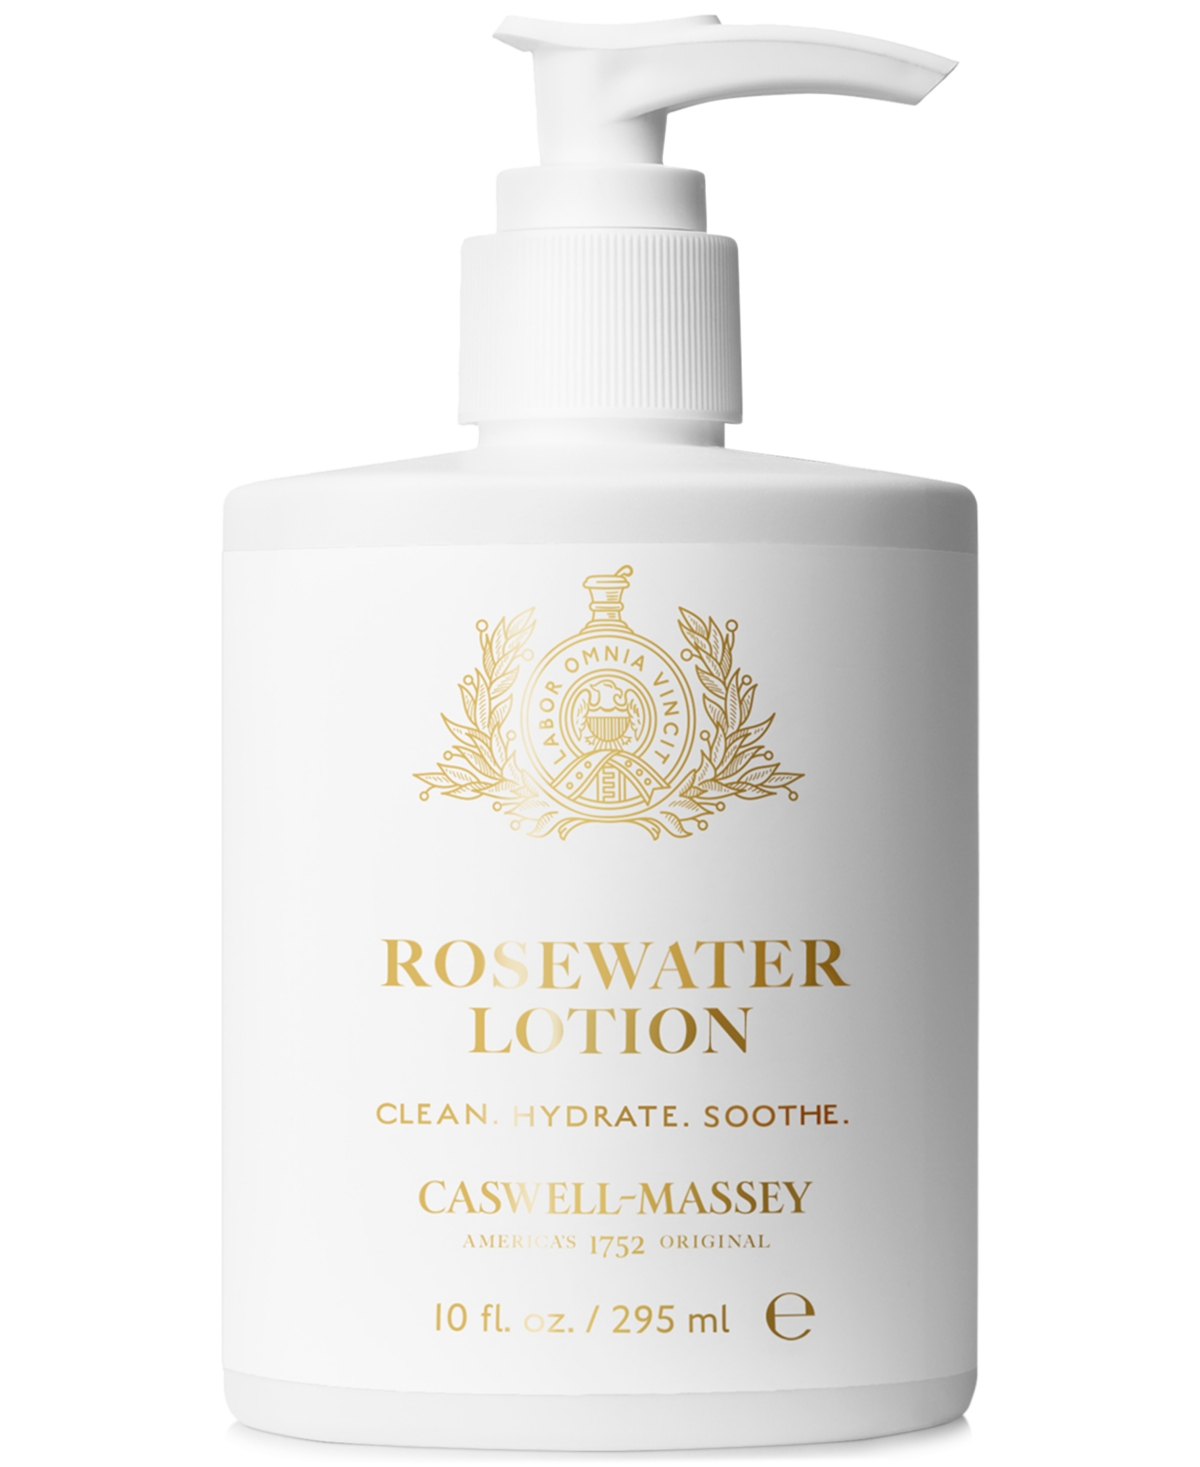 Caswell-massey Centuries Rosewater Lotion, 10 Oz.